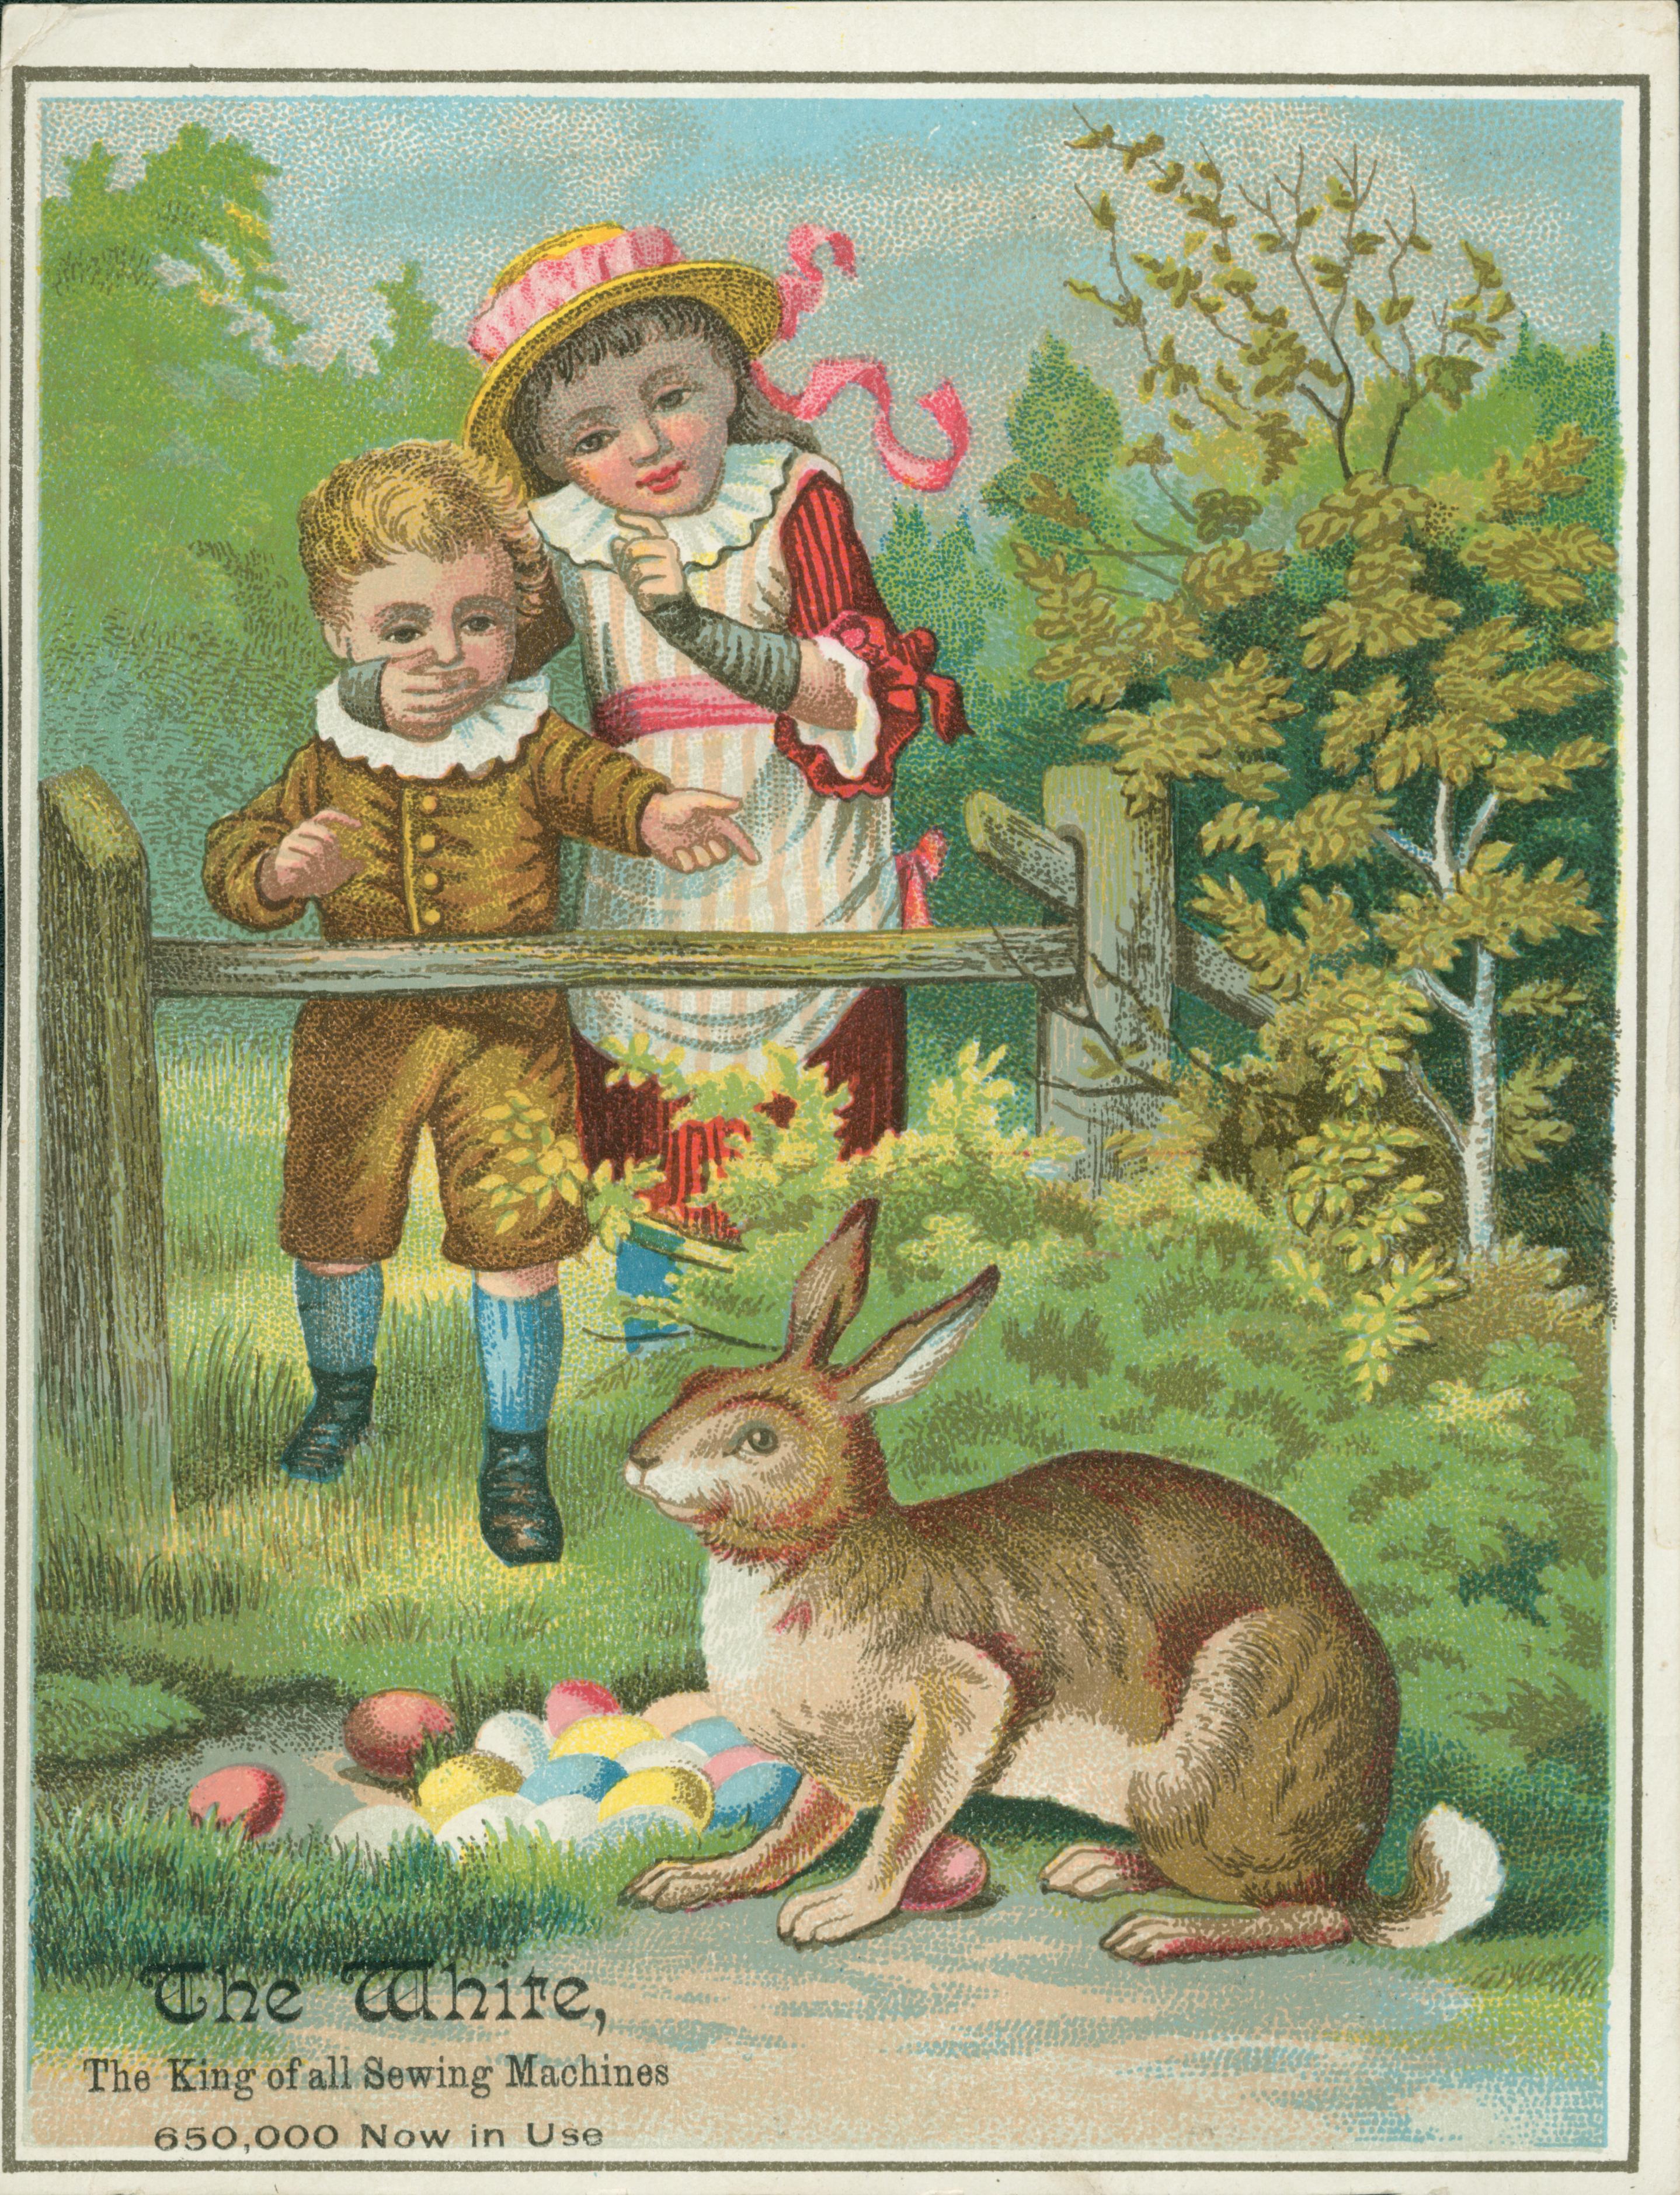 Image shows two children behind fence looking at colored eggs and rabbit.